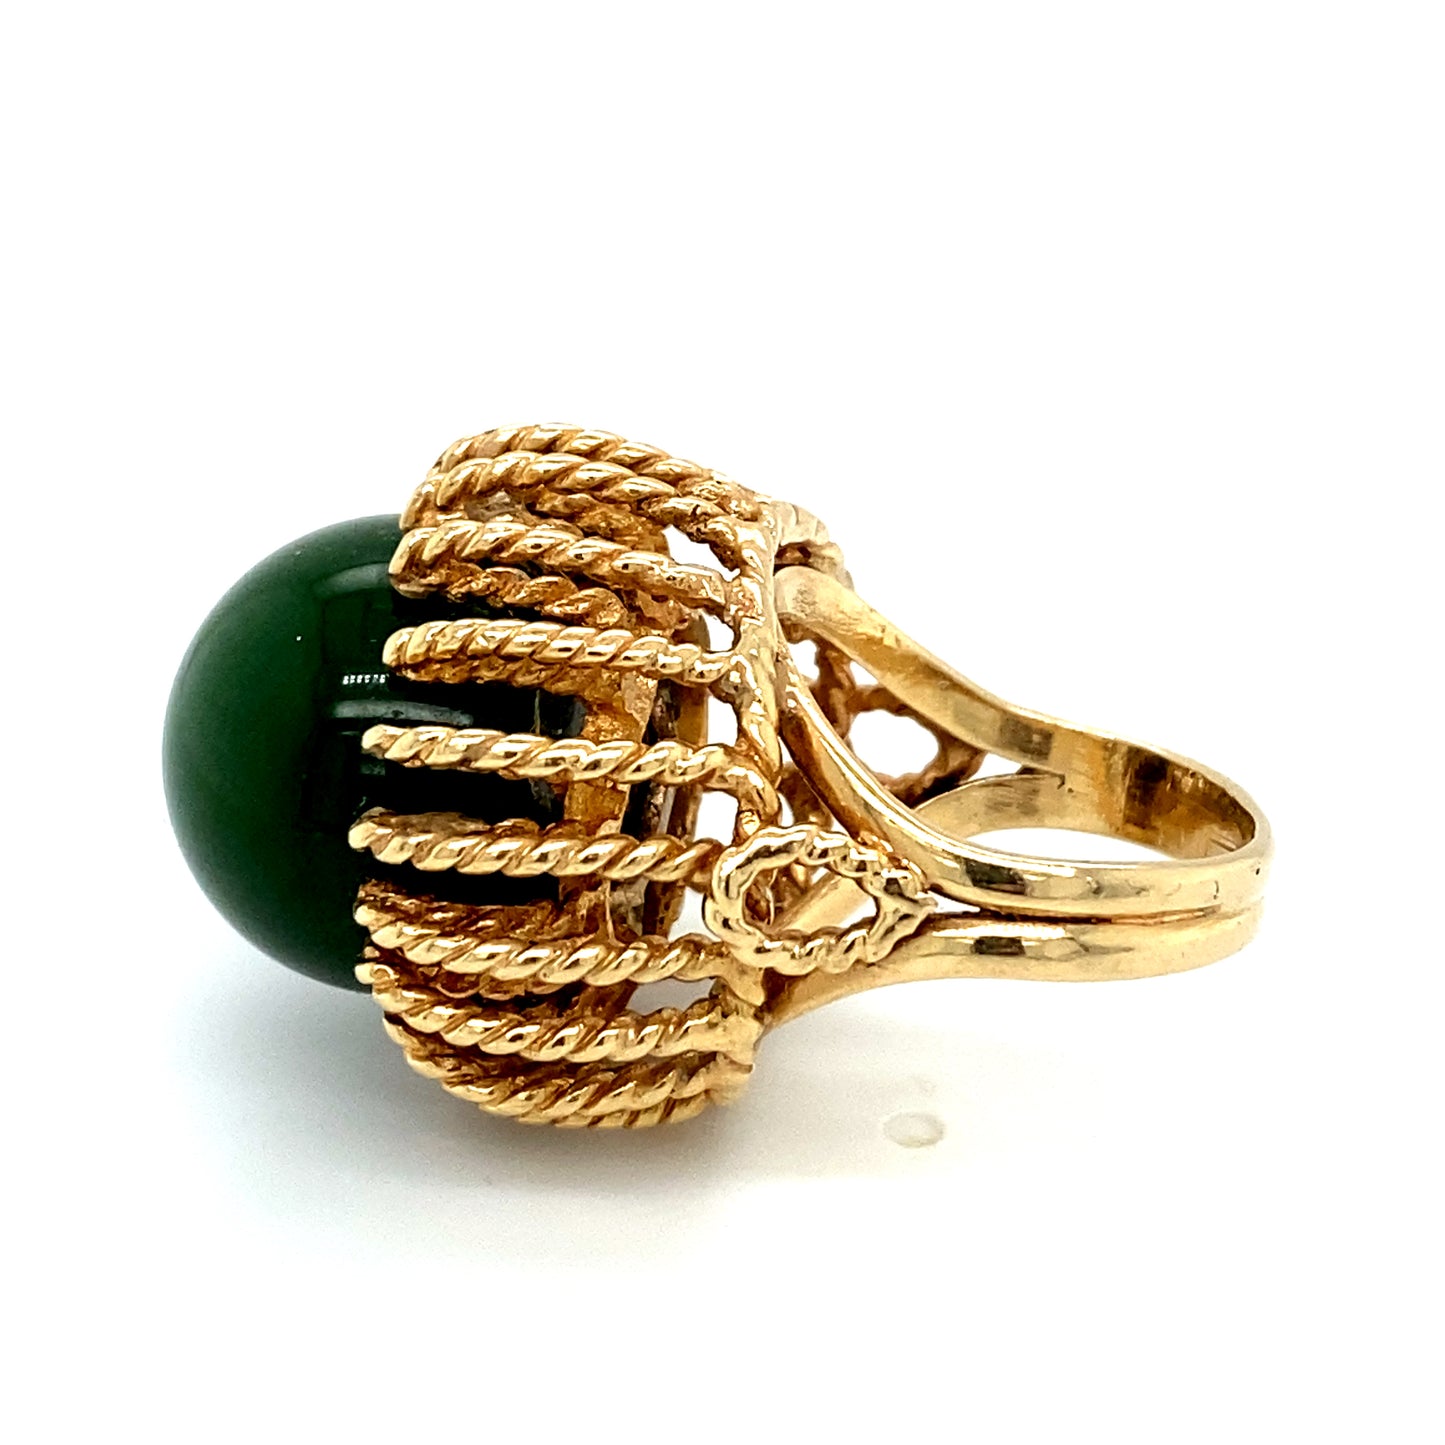 Circa 1960s Green Jade Cocktail Ring in 14K Gold